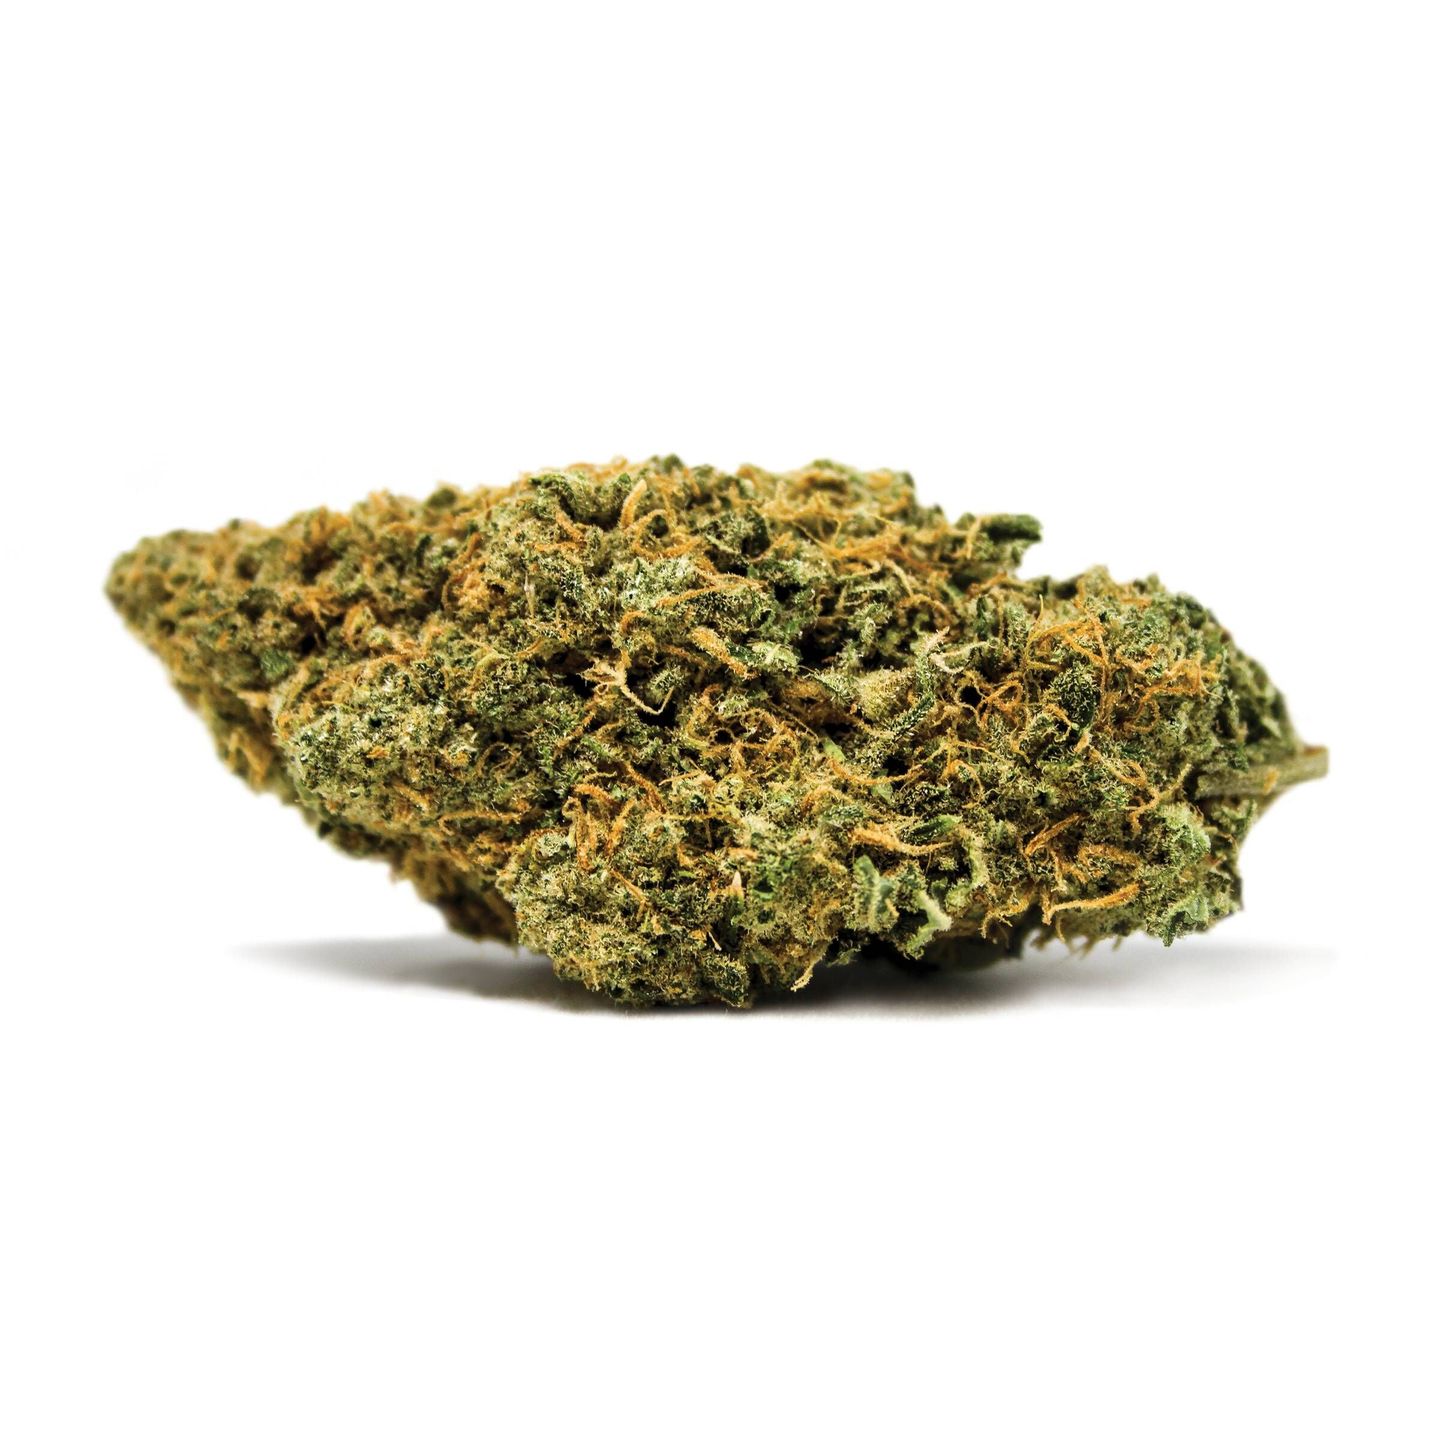 Cannabis Product White Widow by Spinach